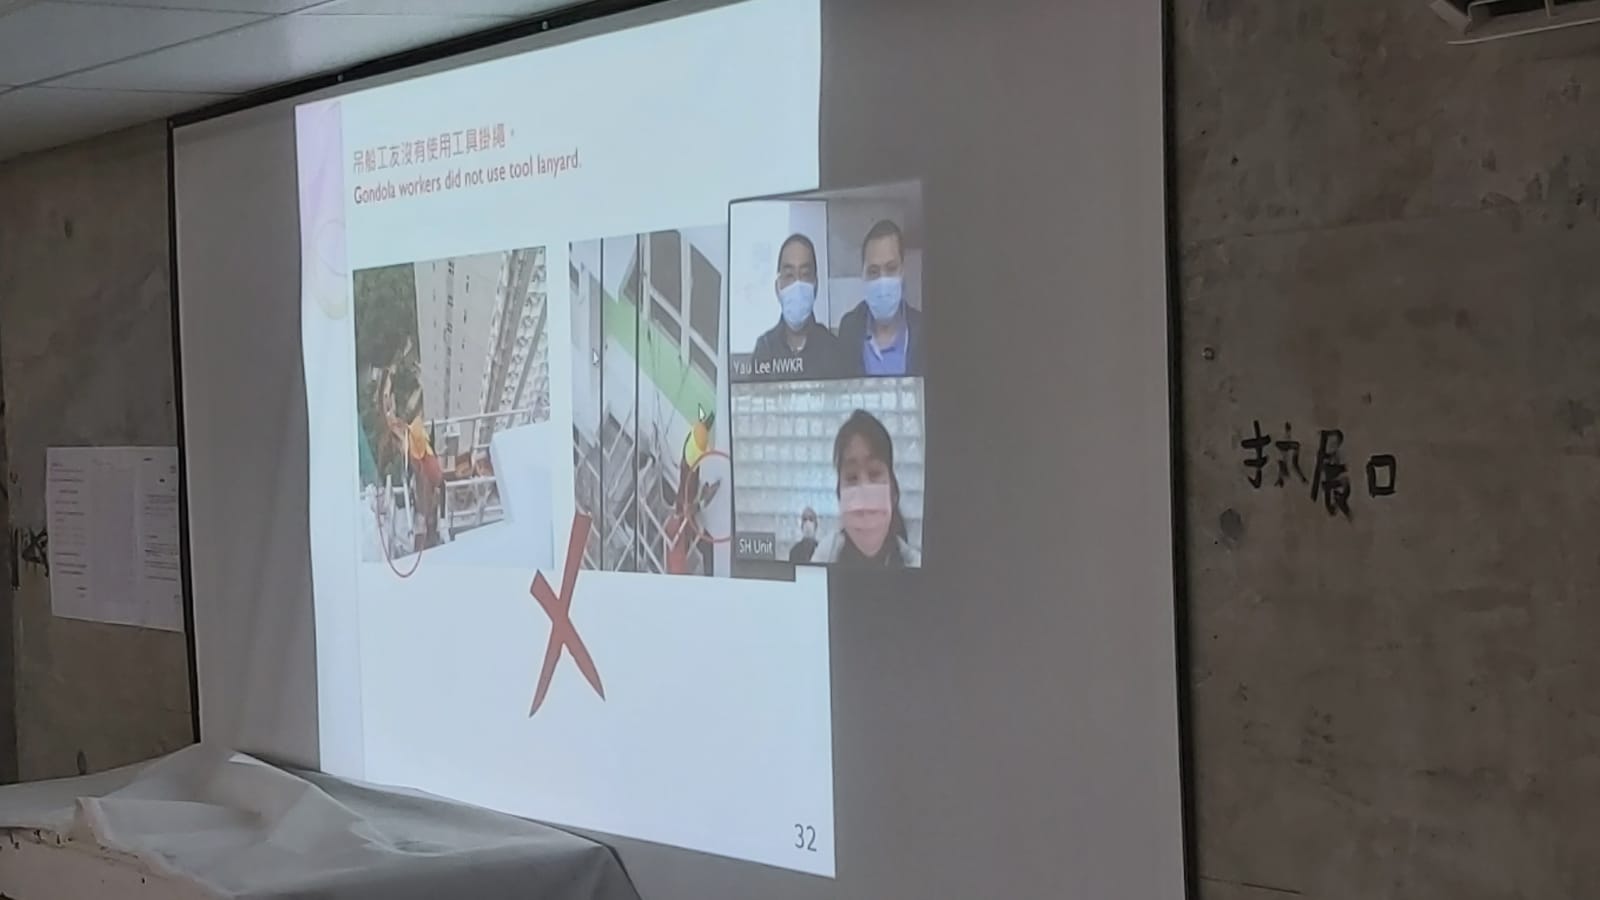 Lunchtime's Safety Talk at North West Kowloon Reclamation Site 6 and Fat Tseung Street West on 3/2/2021